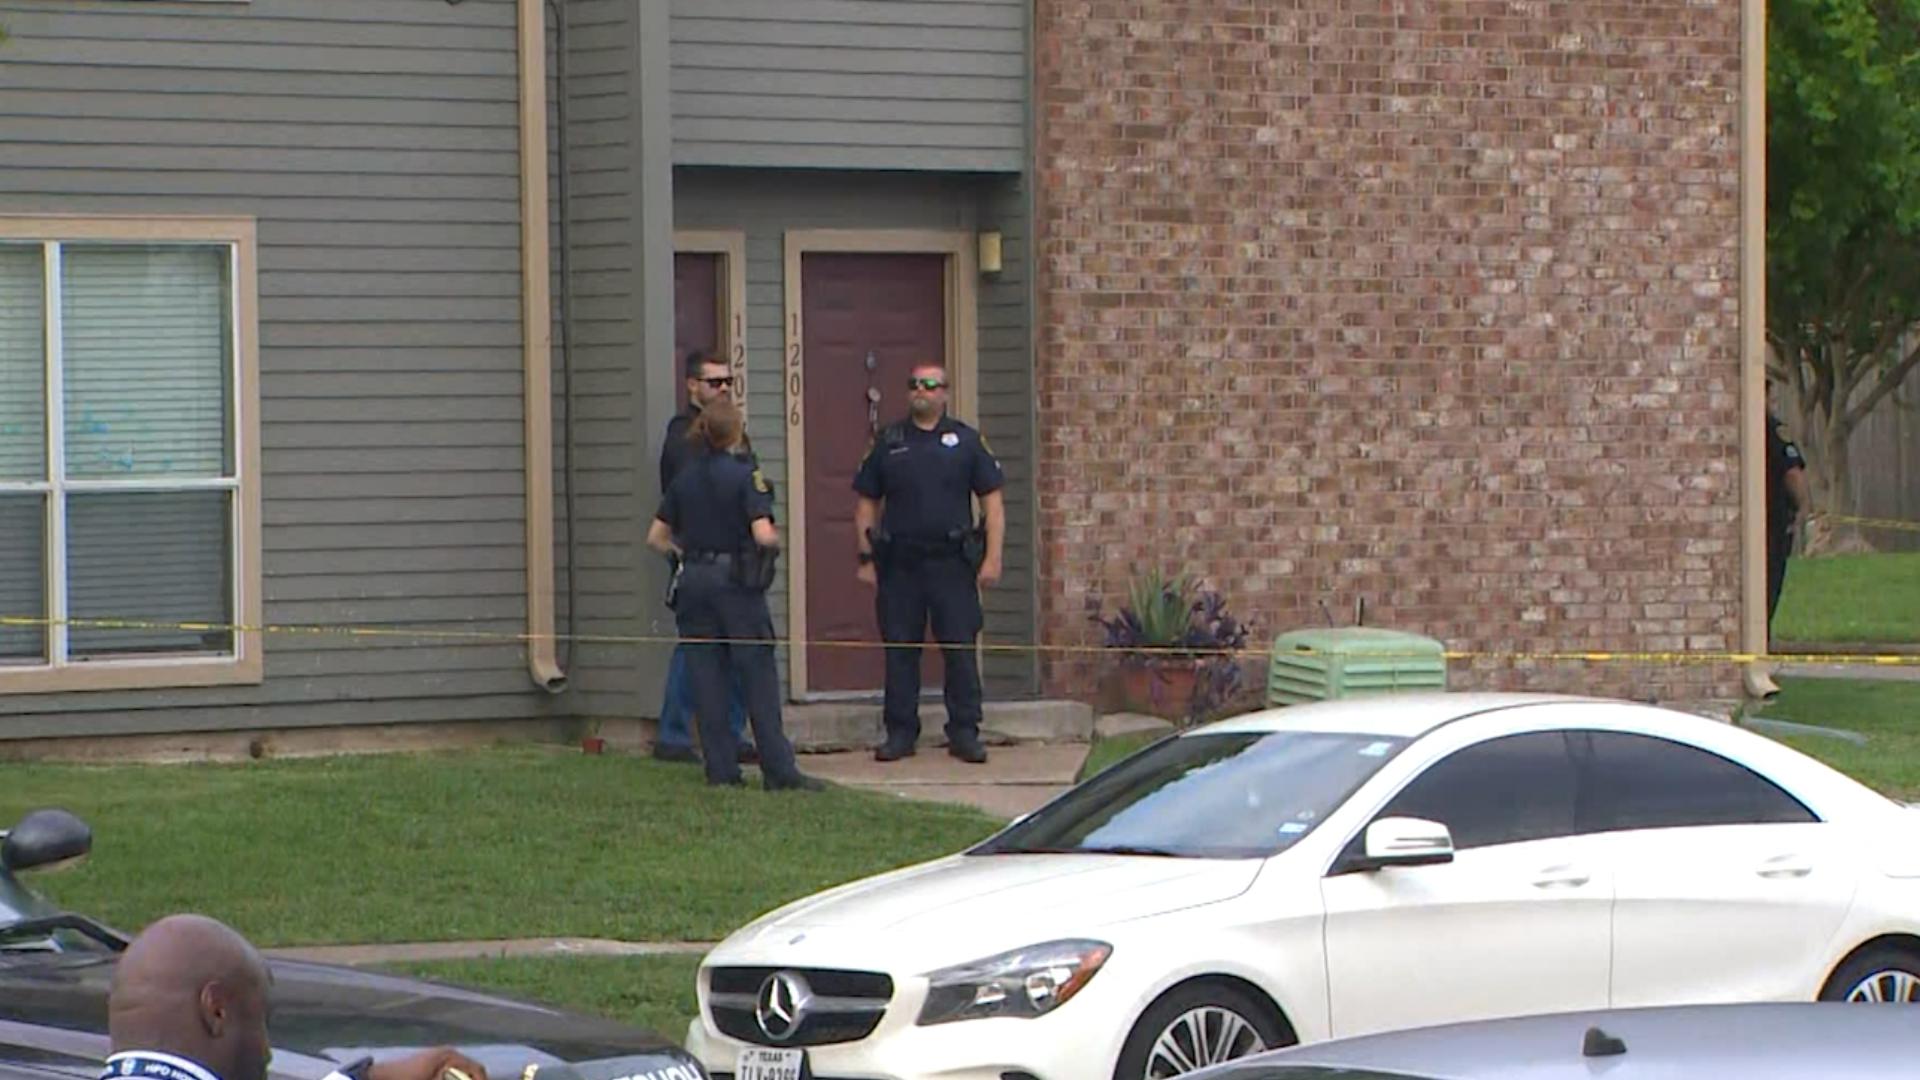 The deadly shooting happened at an apartment complex in the Clear Lake area.